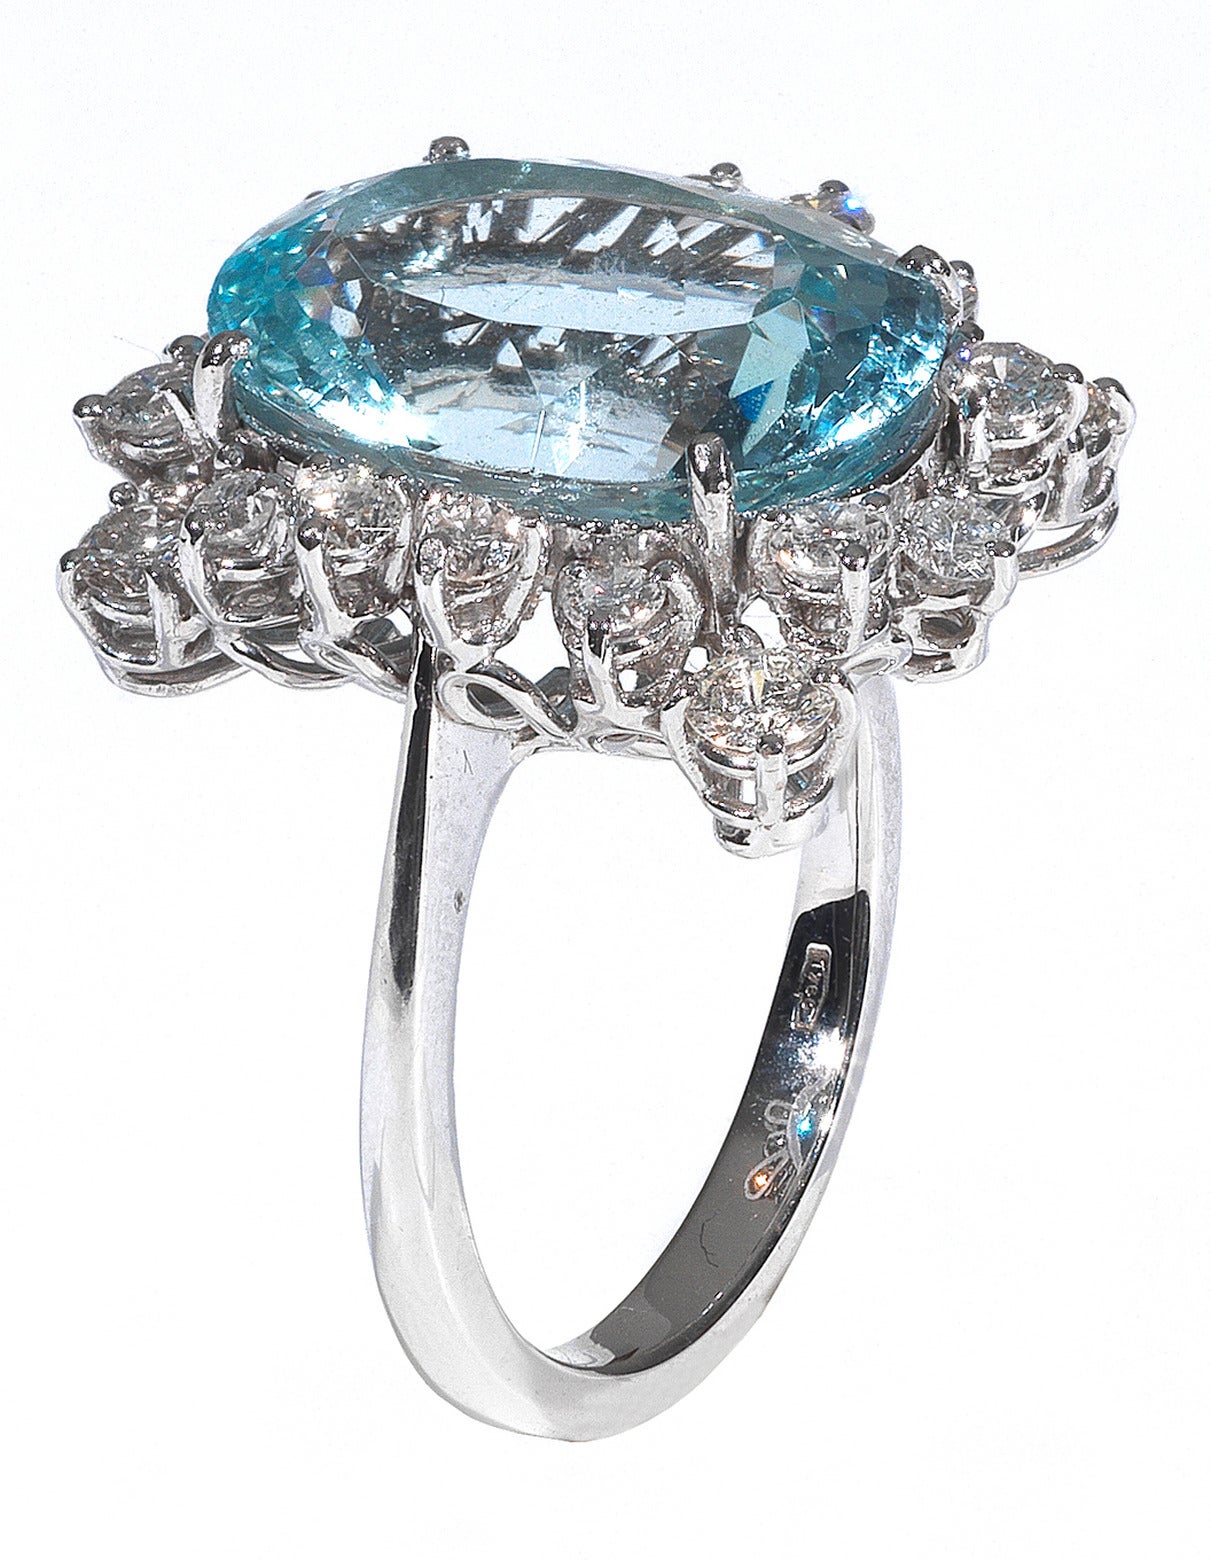 Claw-set with an oval shape mixed-cut aquamarine weighing 9 cts, bordered by a brilliant-cut diamond frame.

The diamonds weighing 1.25 cts

Mounted in 18Kt white gold

Finger size: 6.5

Weight: 8.8 gr